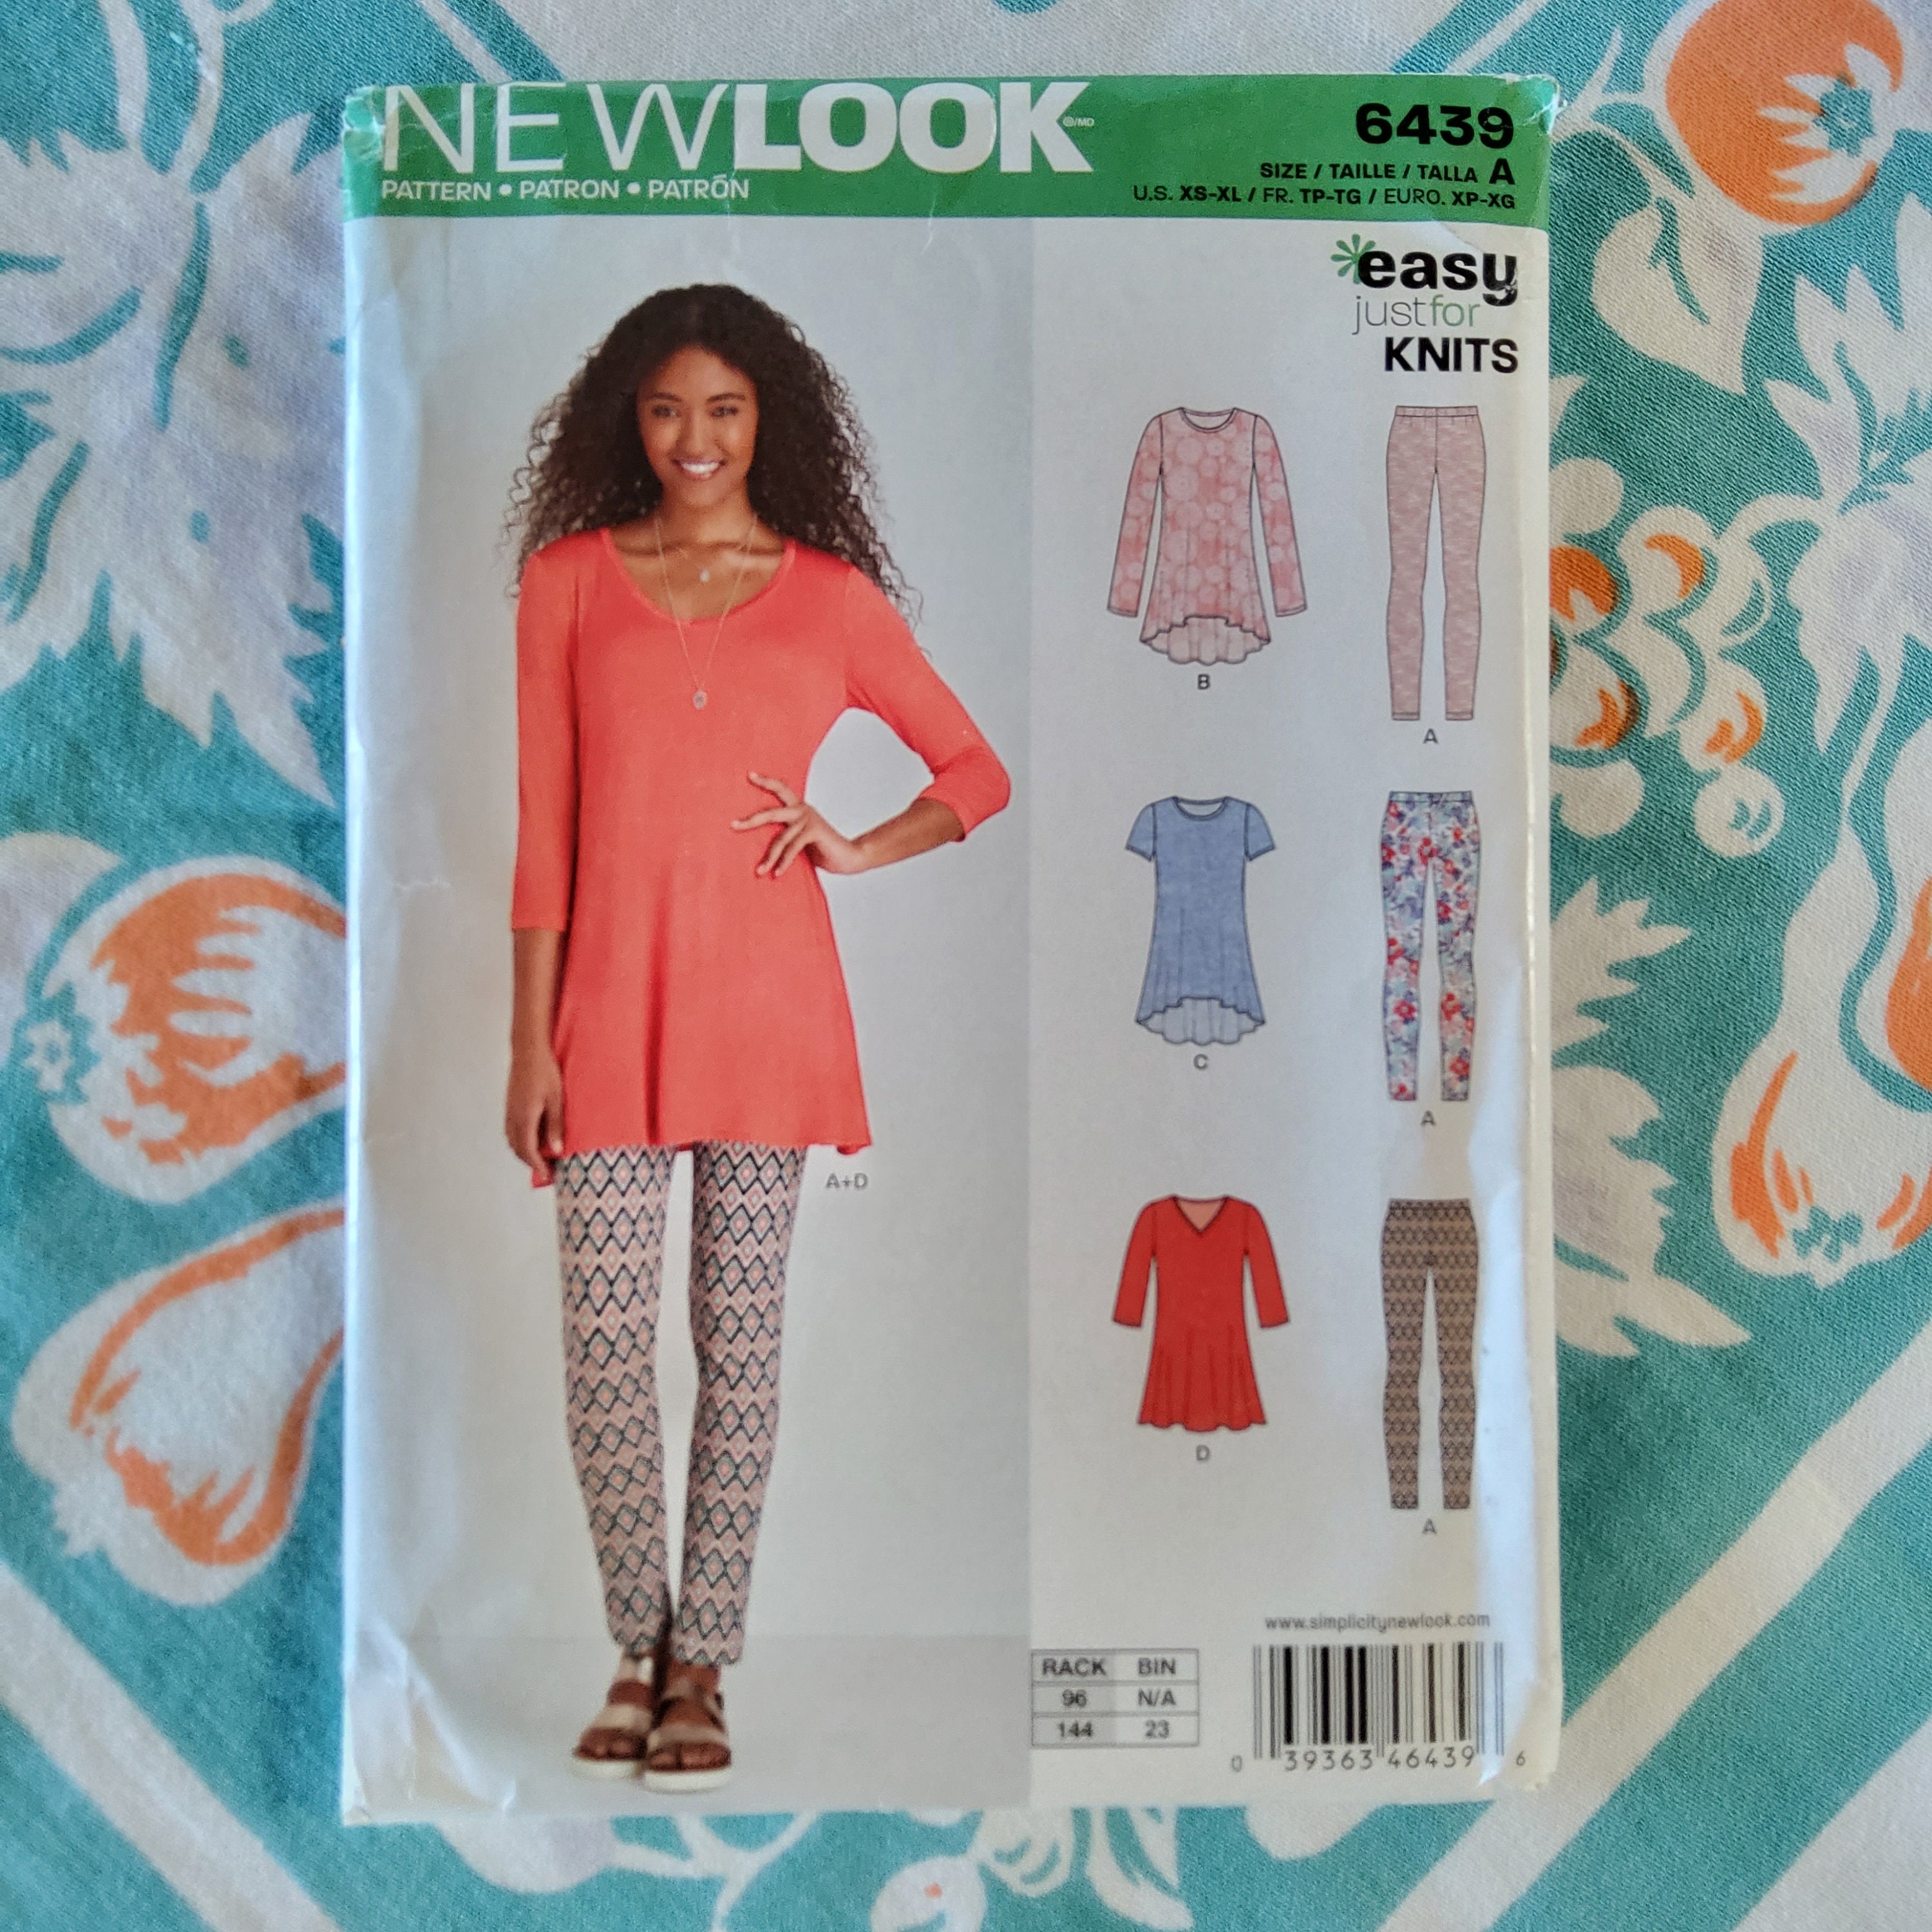 New Look 6439 Complete Uncut Factory Folds Sewing Pattern Knit High Low  Skater Style Tops and Leggings Size XS-XL Bust 30.5-46 